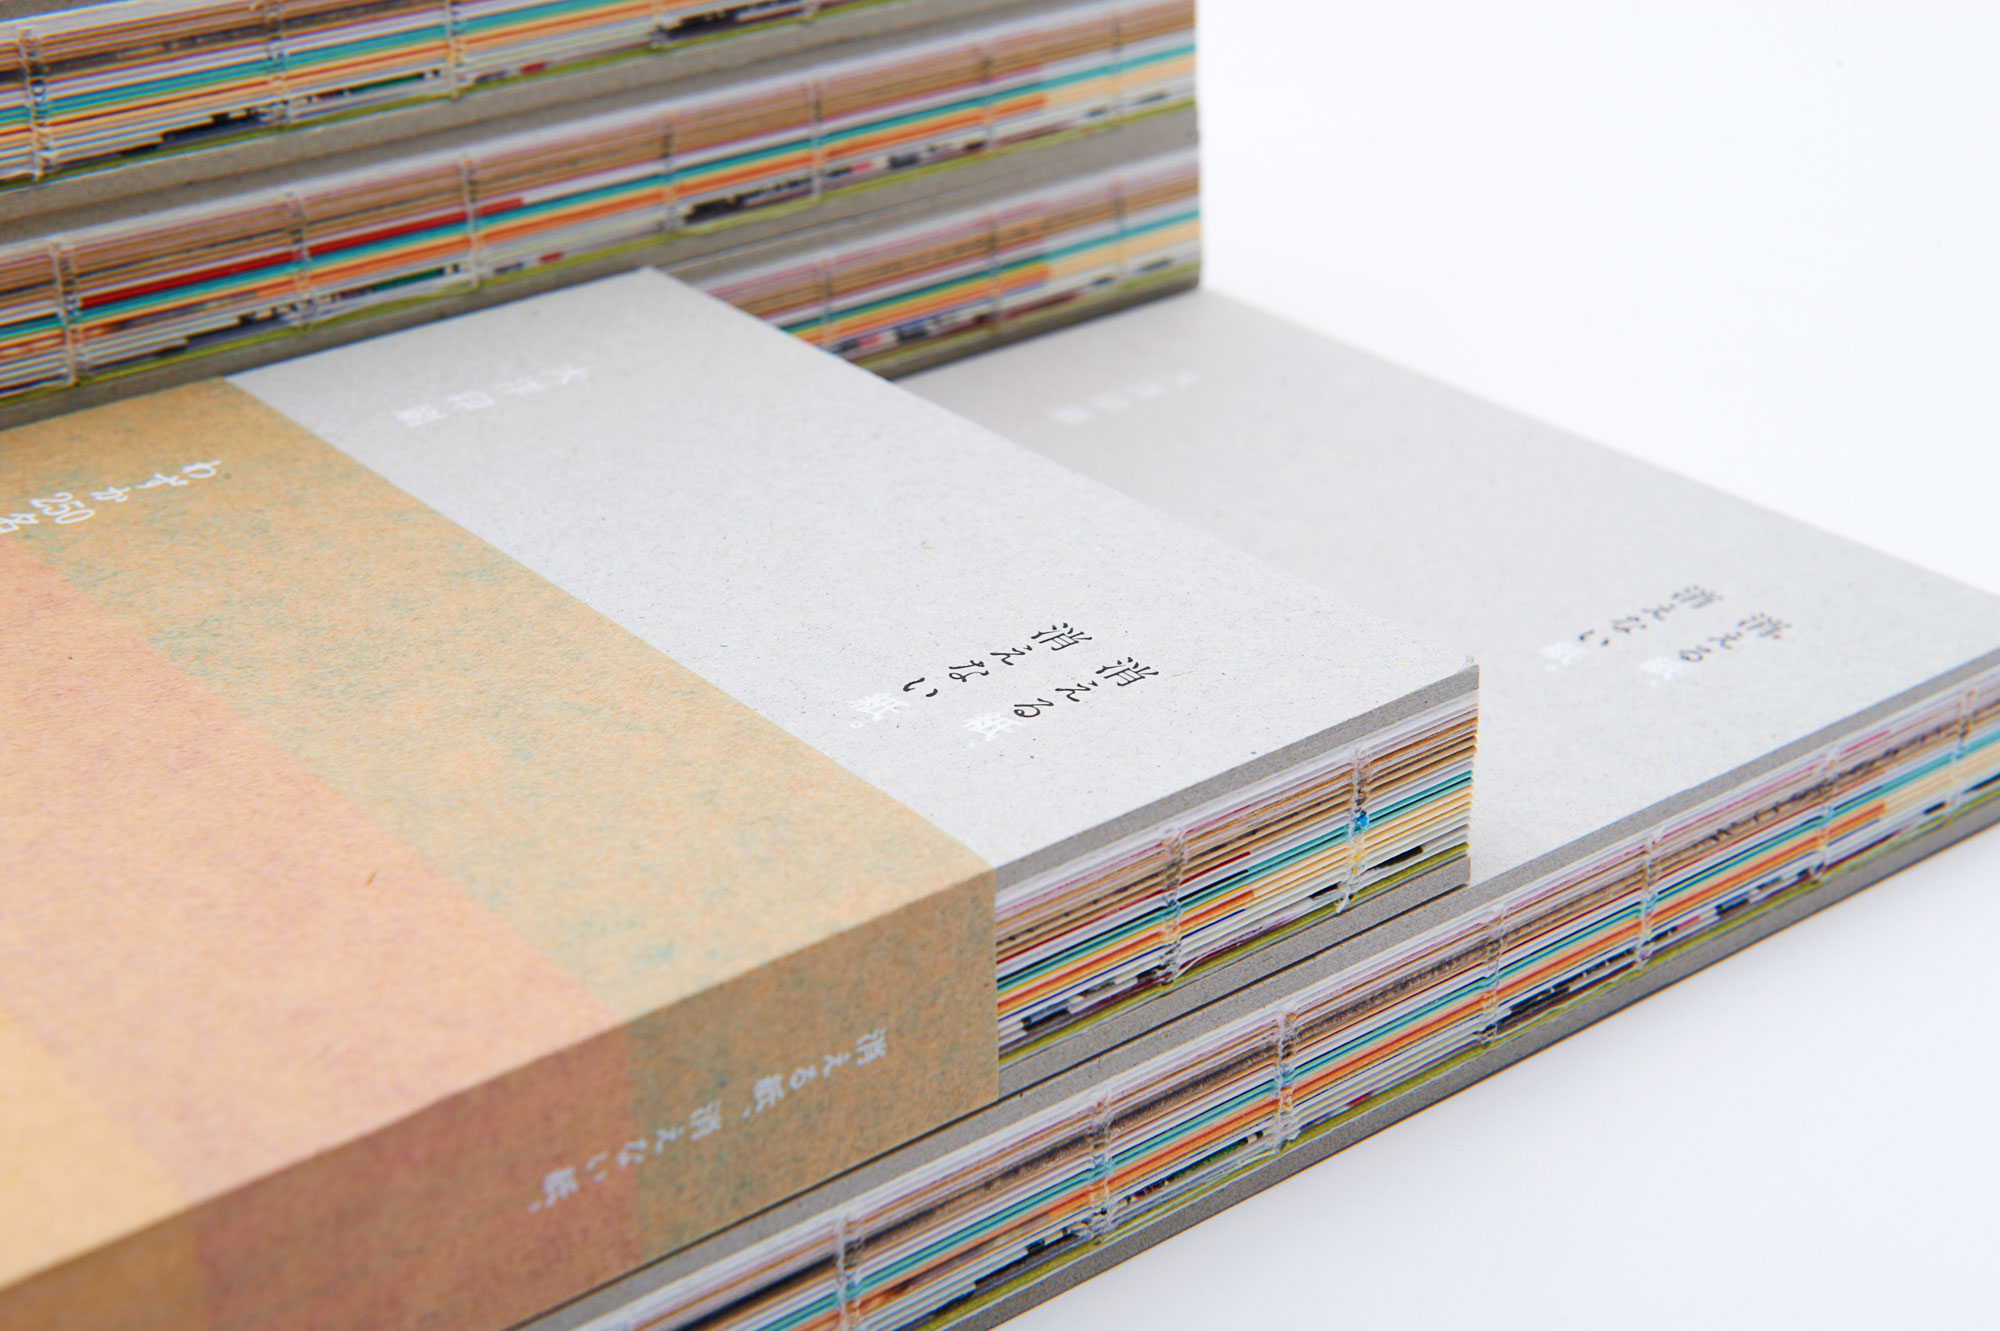 Judging books by their covers | Japanese creative book design ...